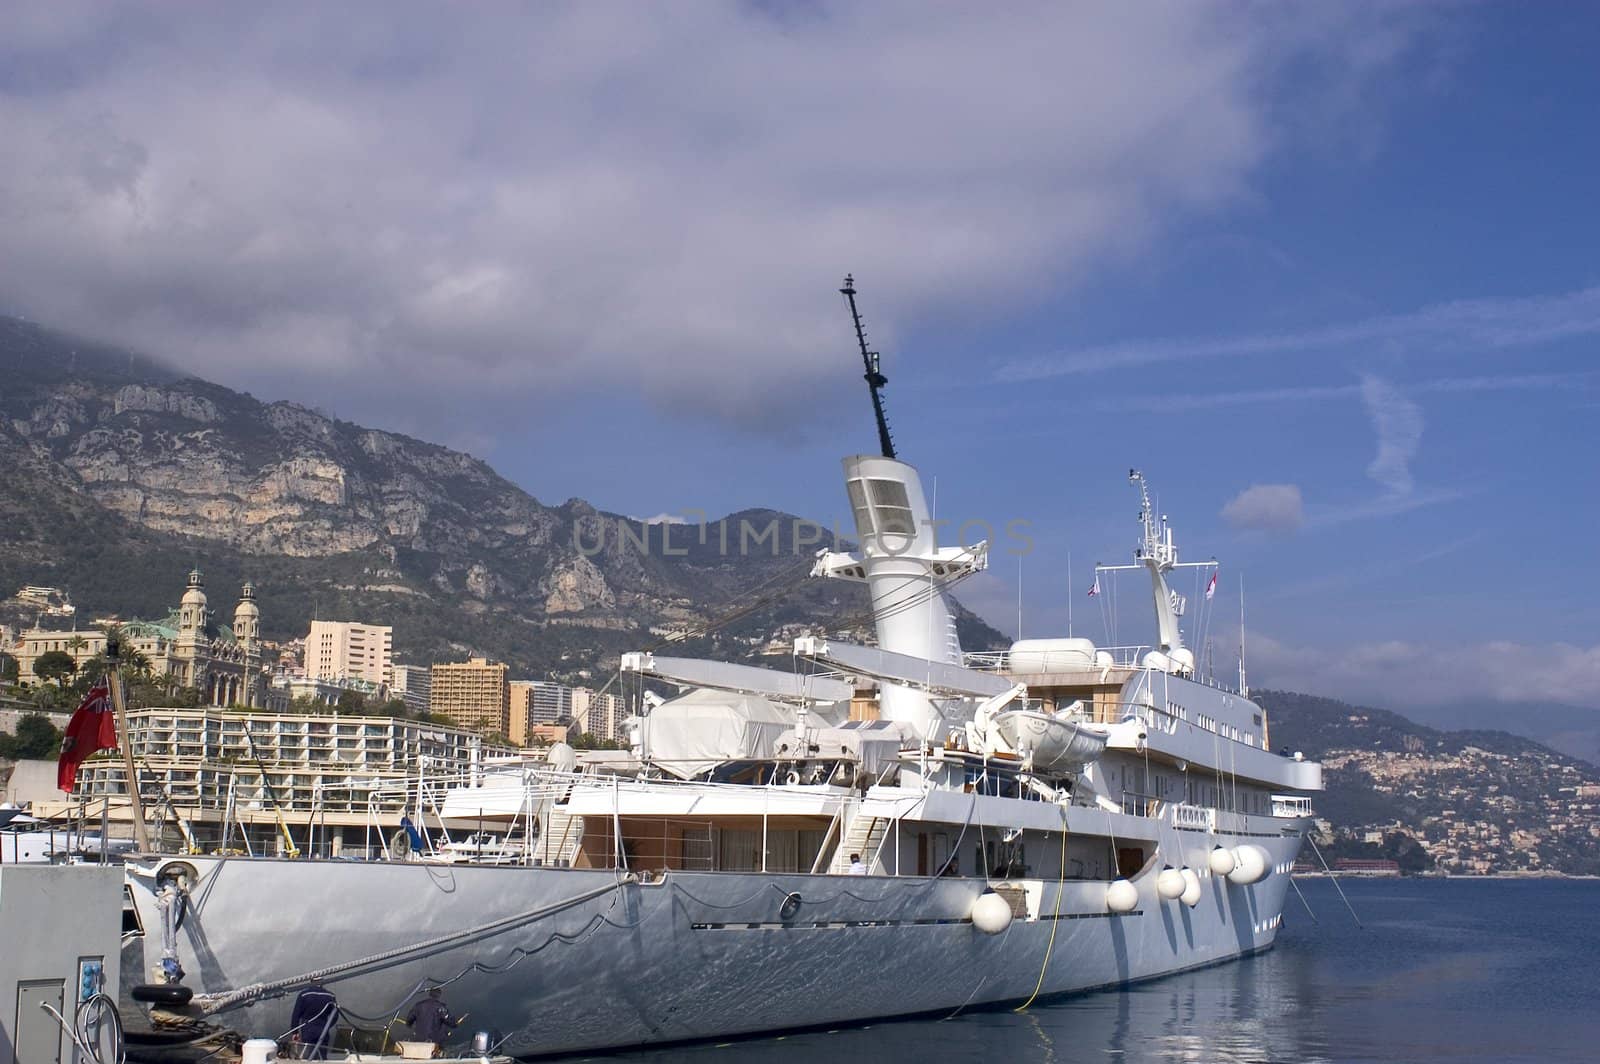 yachts in Monaco Harbour by gillespaire